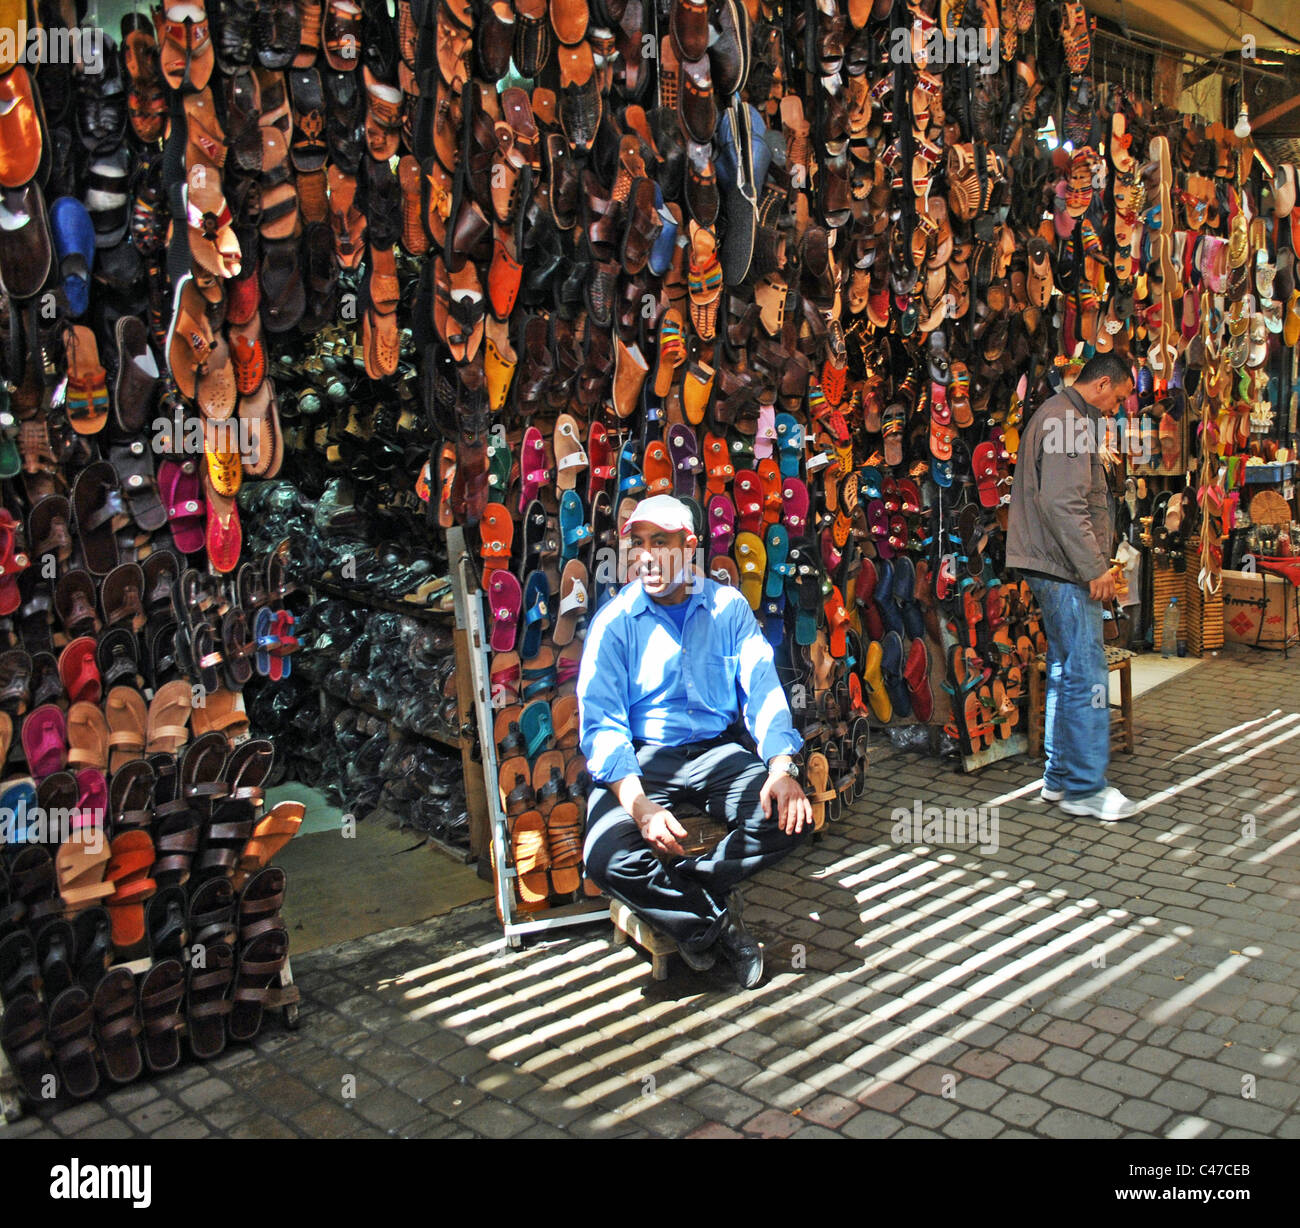 Man selling shoes in a souk in Marrakesh, Morocco Stock Photo